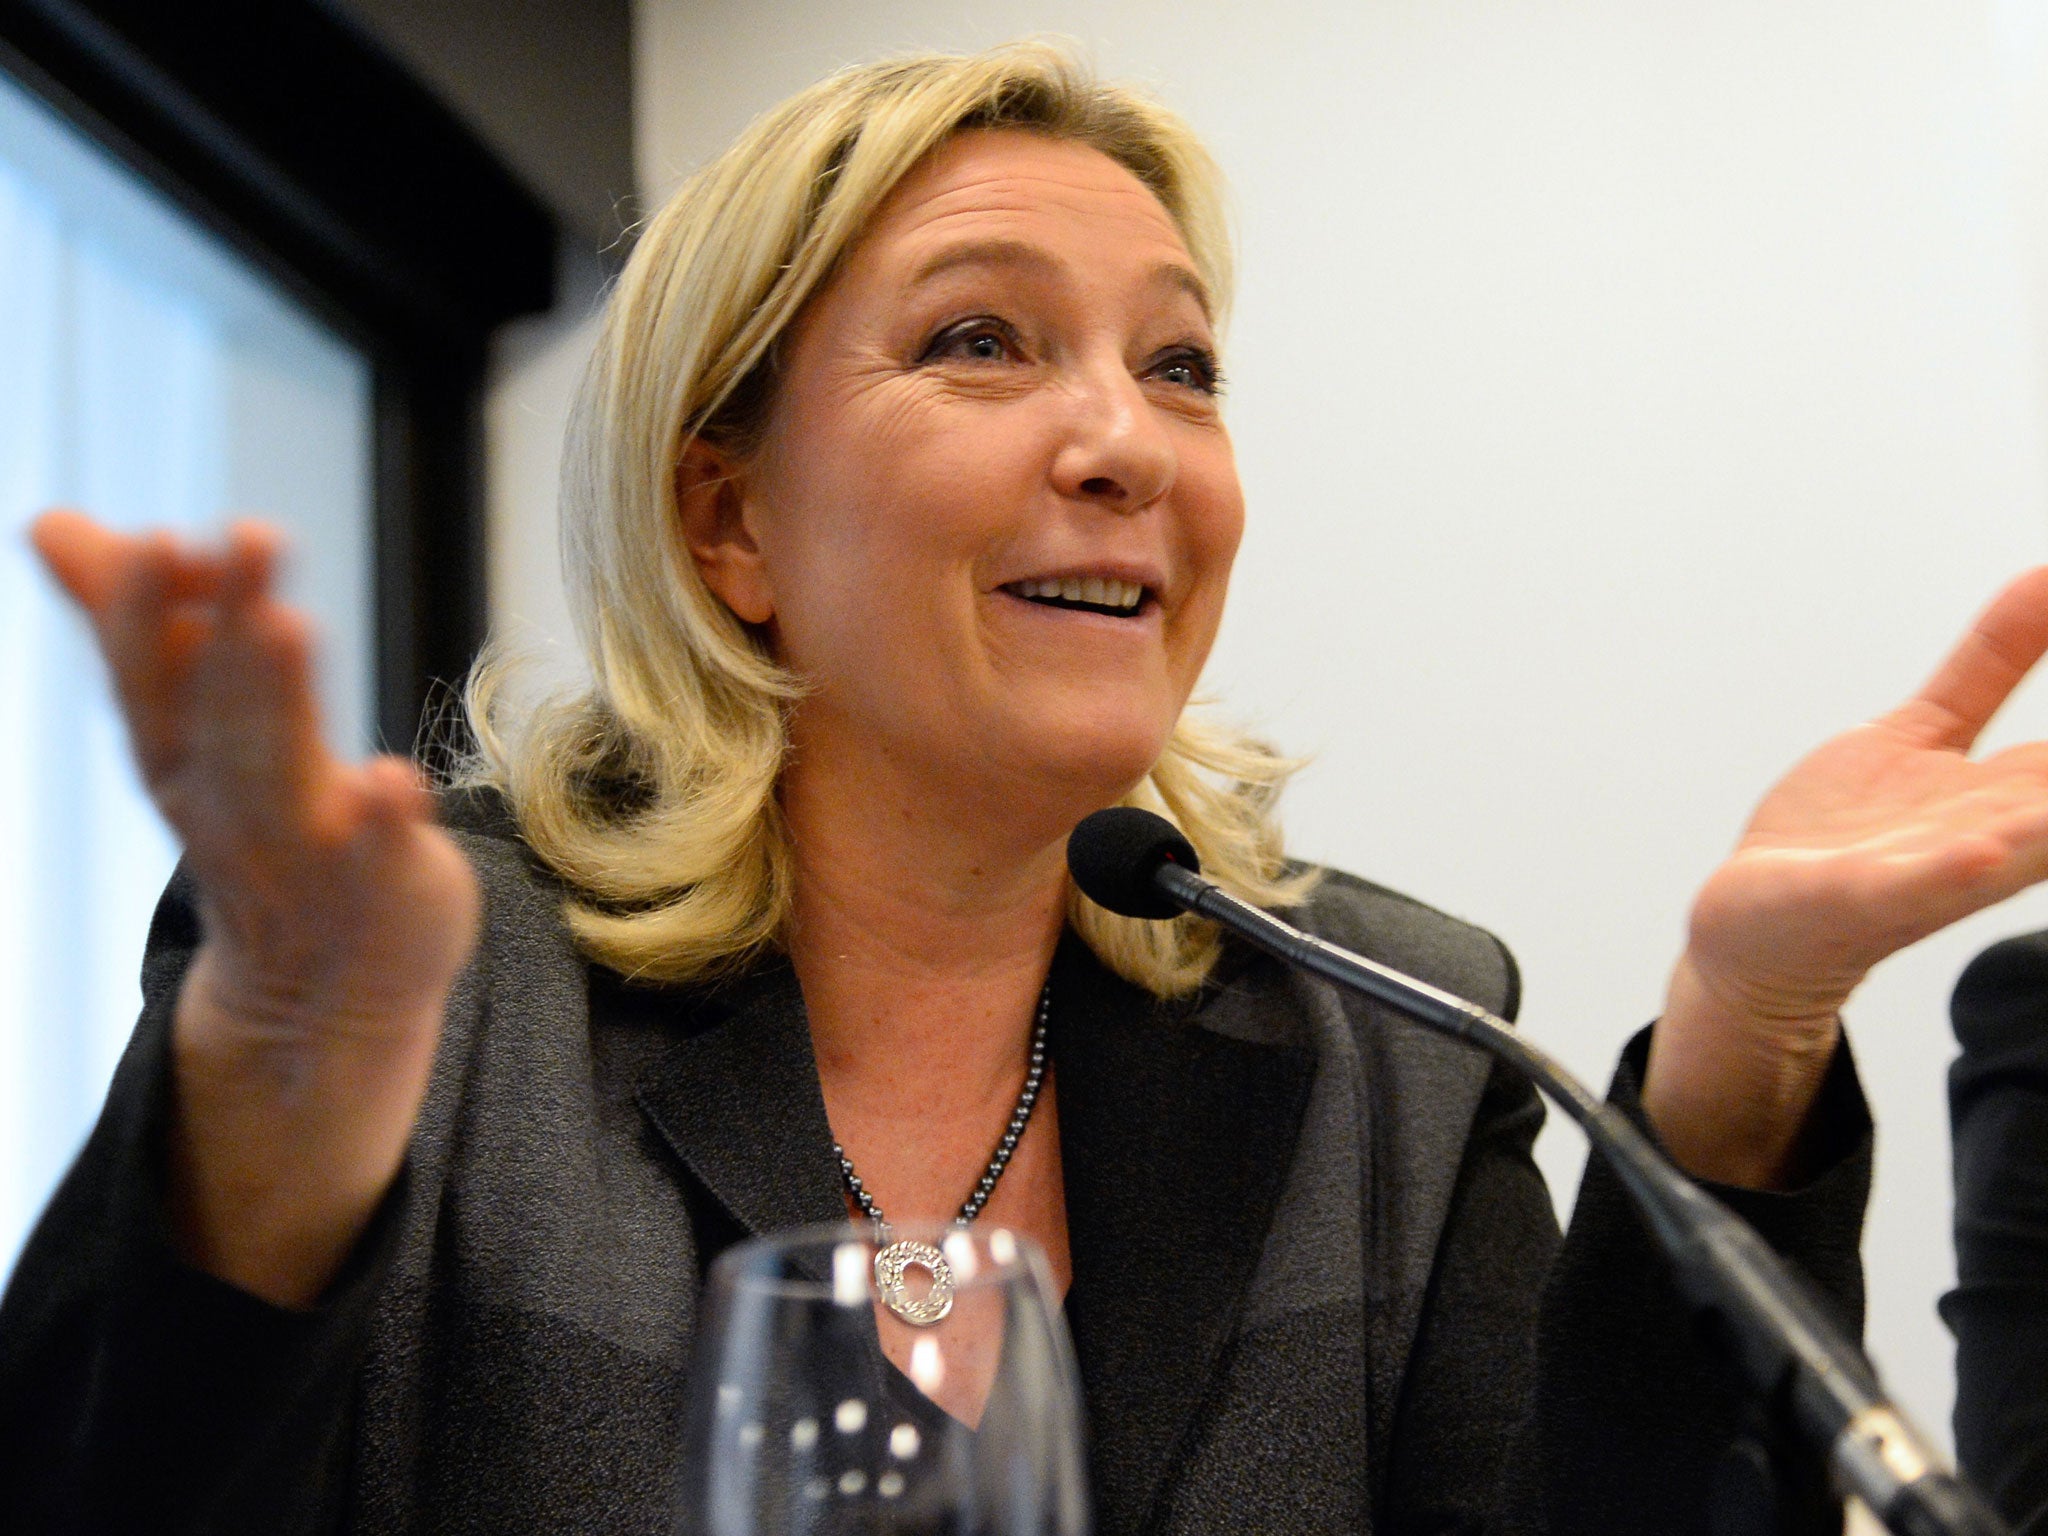 Marine Le Pen is facing the prospect of disappointing results in local elections in March